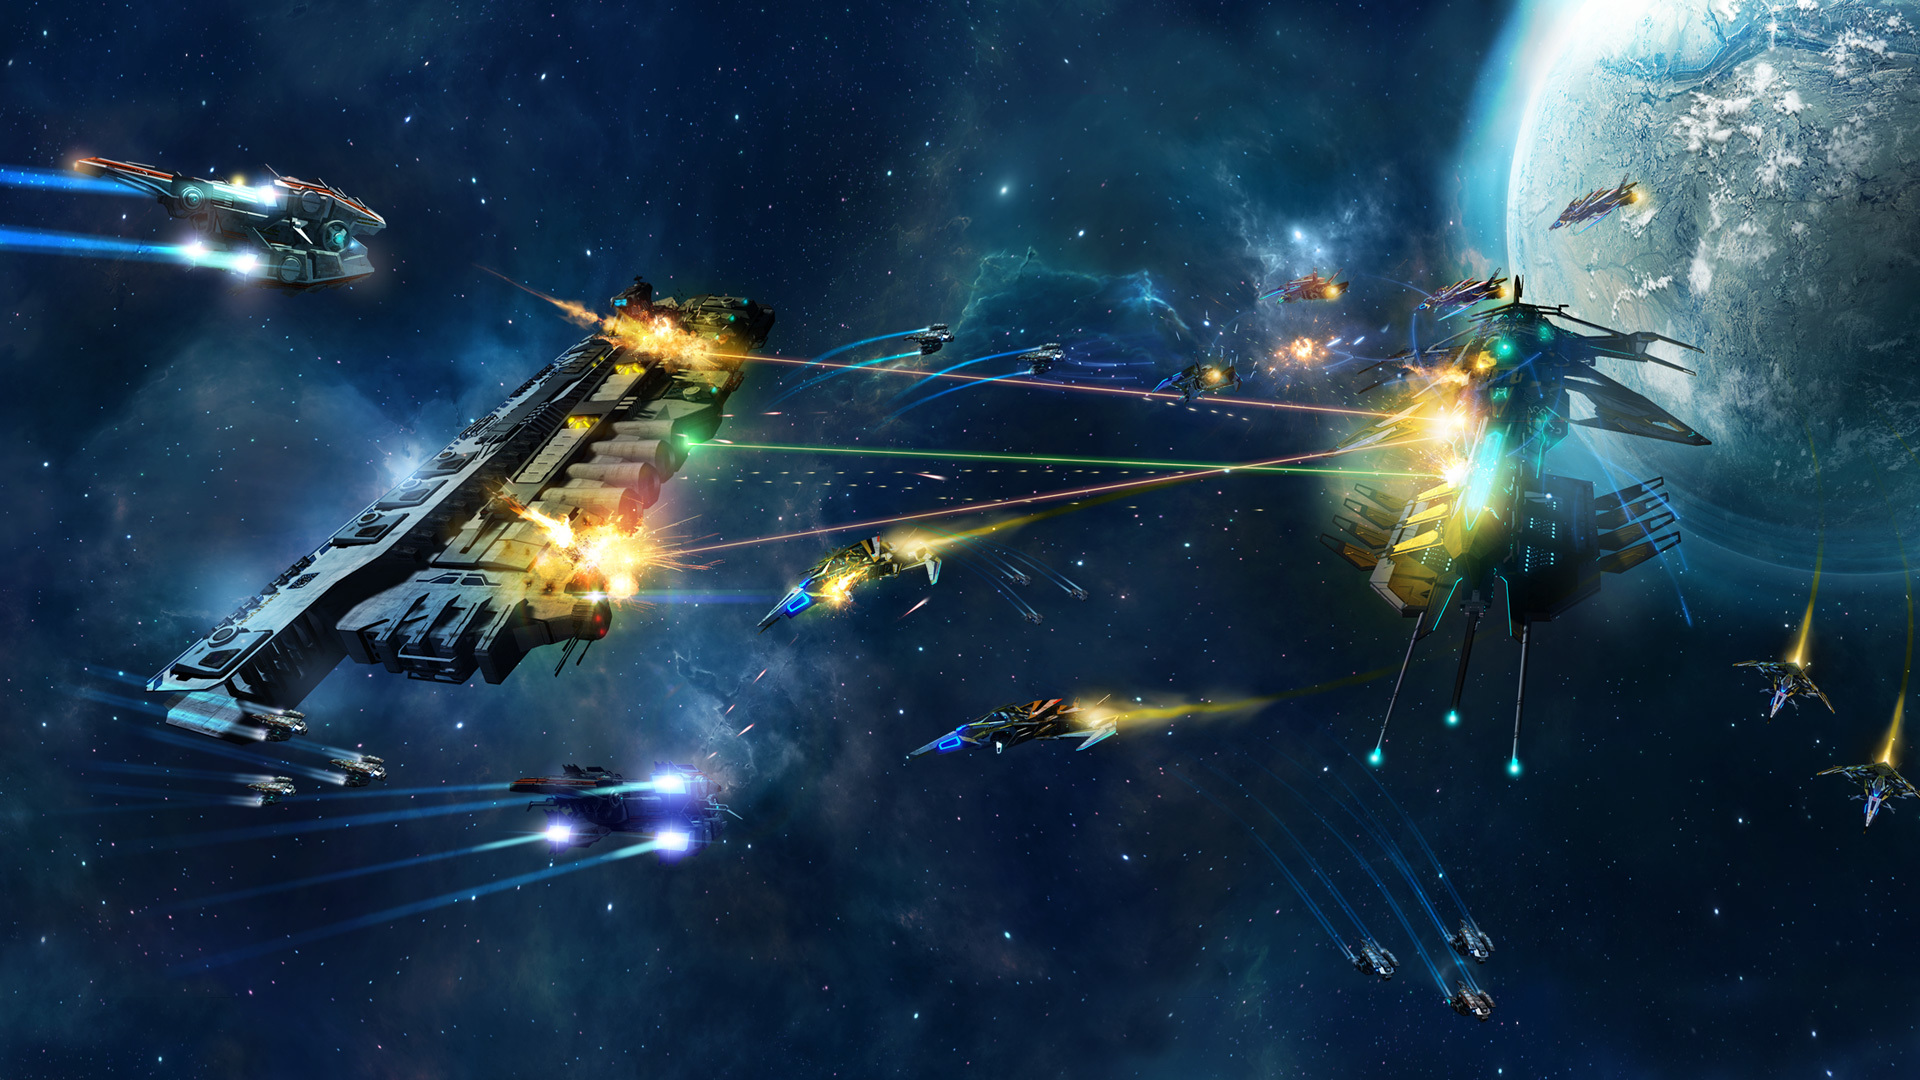 Steam Starpoint Gemini Warlords Bounty Hunting Comes With The Latest 1 100 Update Of Warlords